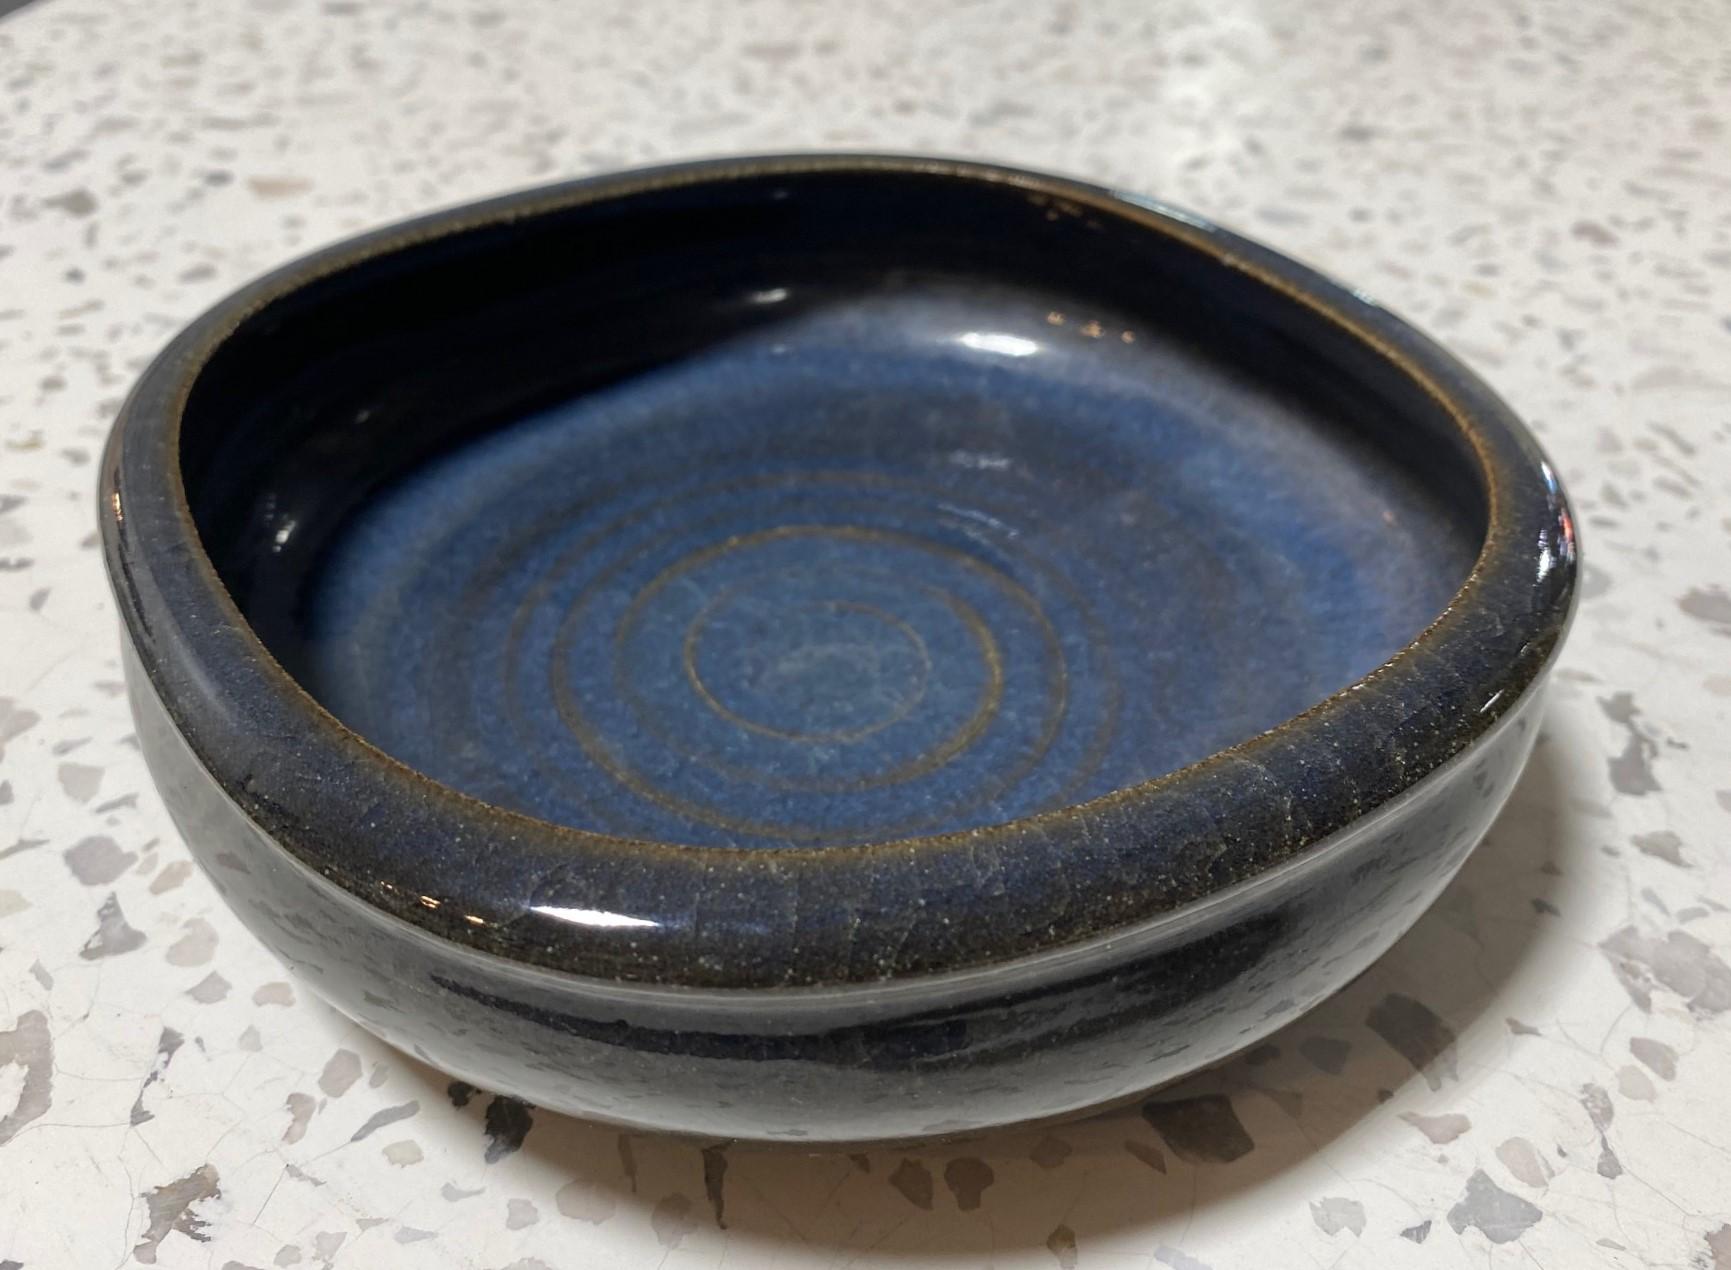 A wonderfully crafted and beautifully glazed bowl by renowned American California master potter Laura Andreson. An uncommon form for Andreson with a high gloss glaze featuring a dark ocean deep blue / aqua color with delicate splashes of greens.